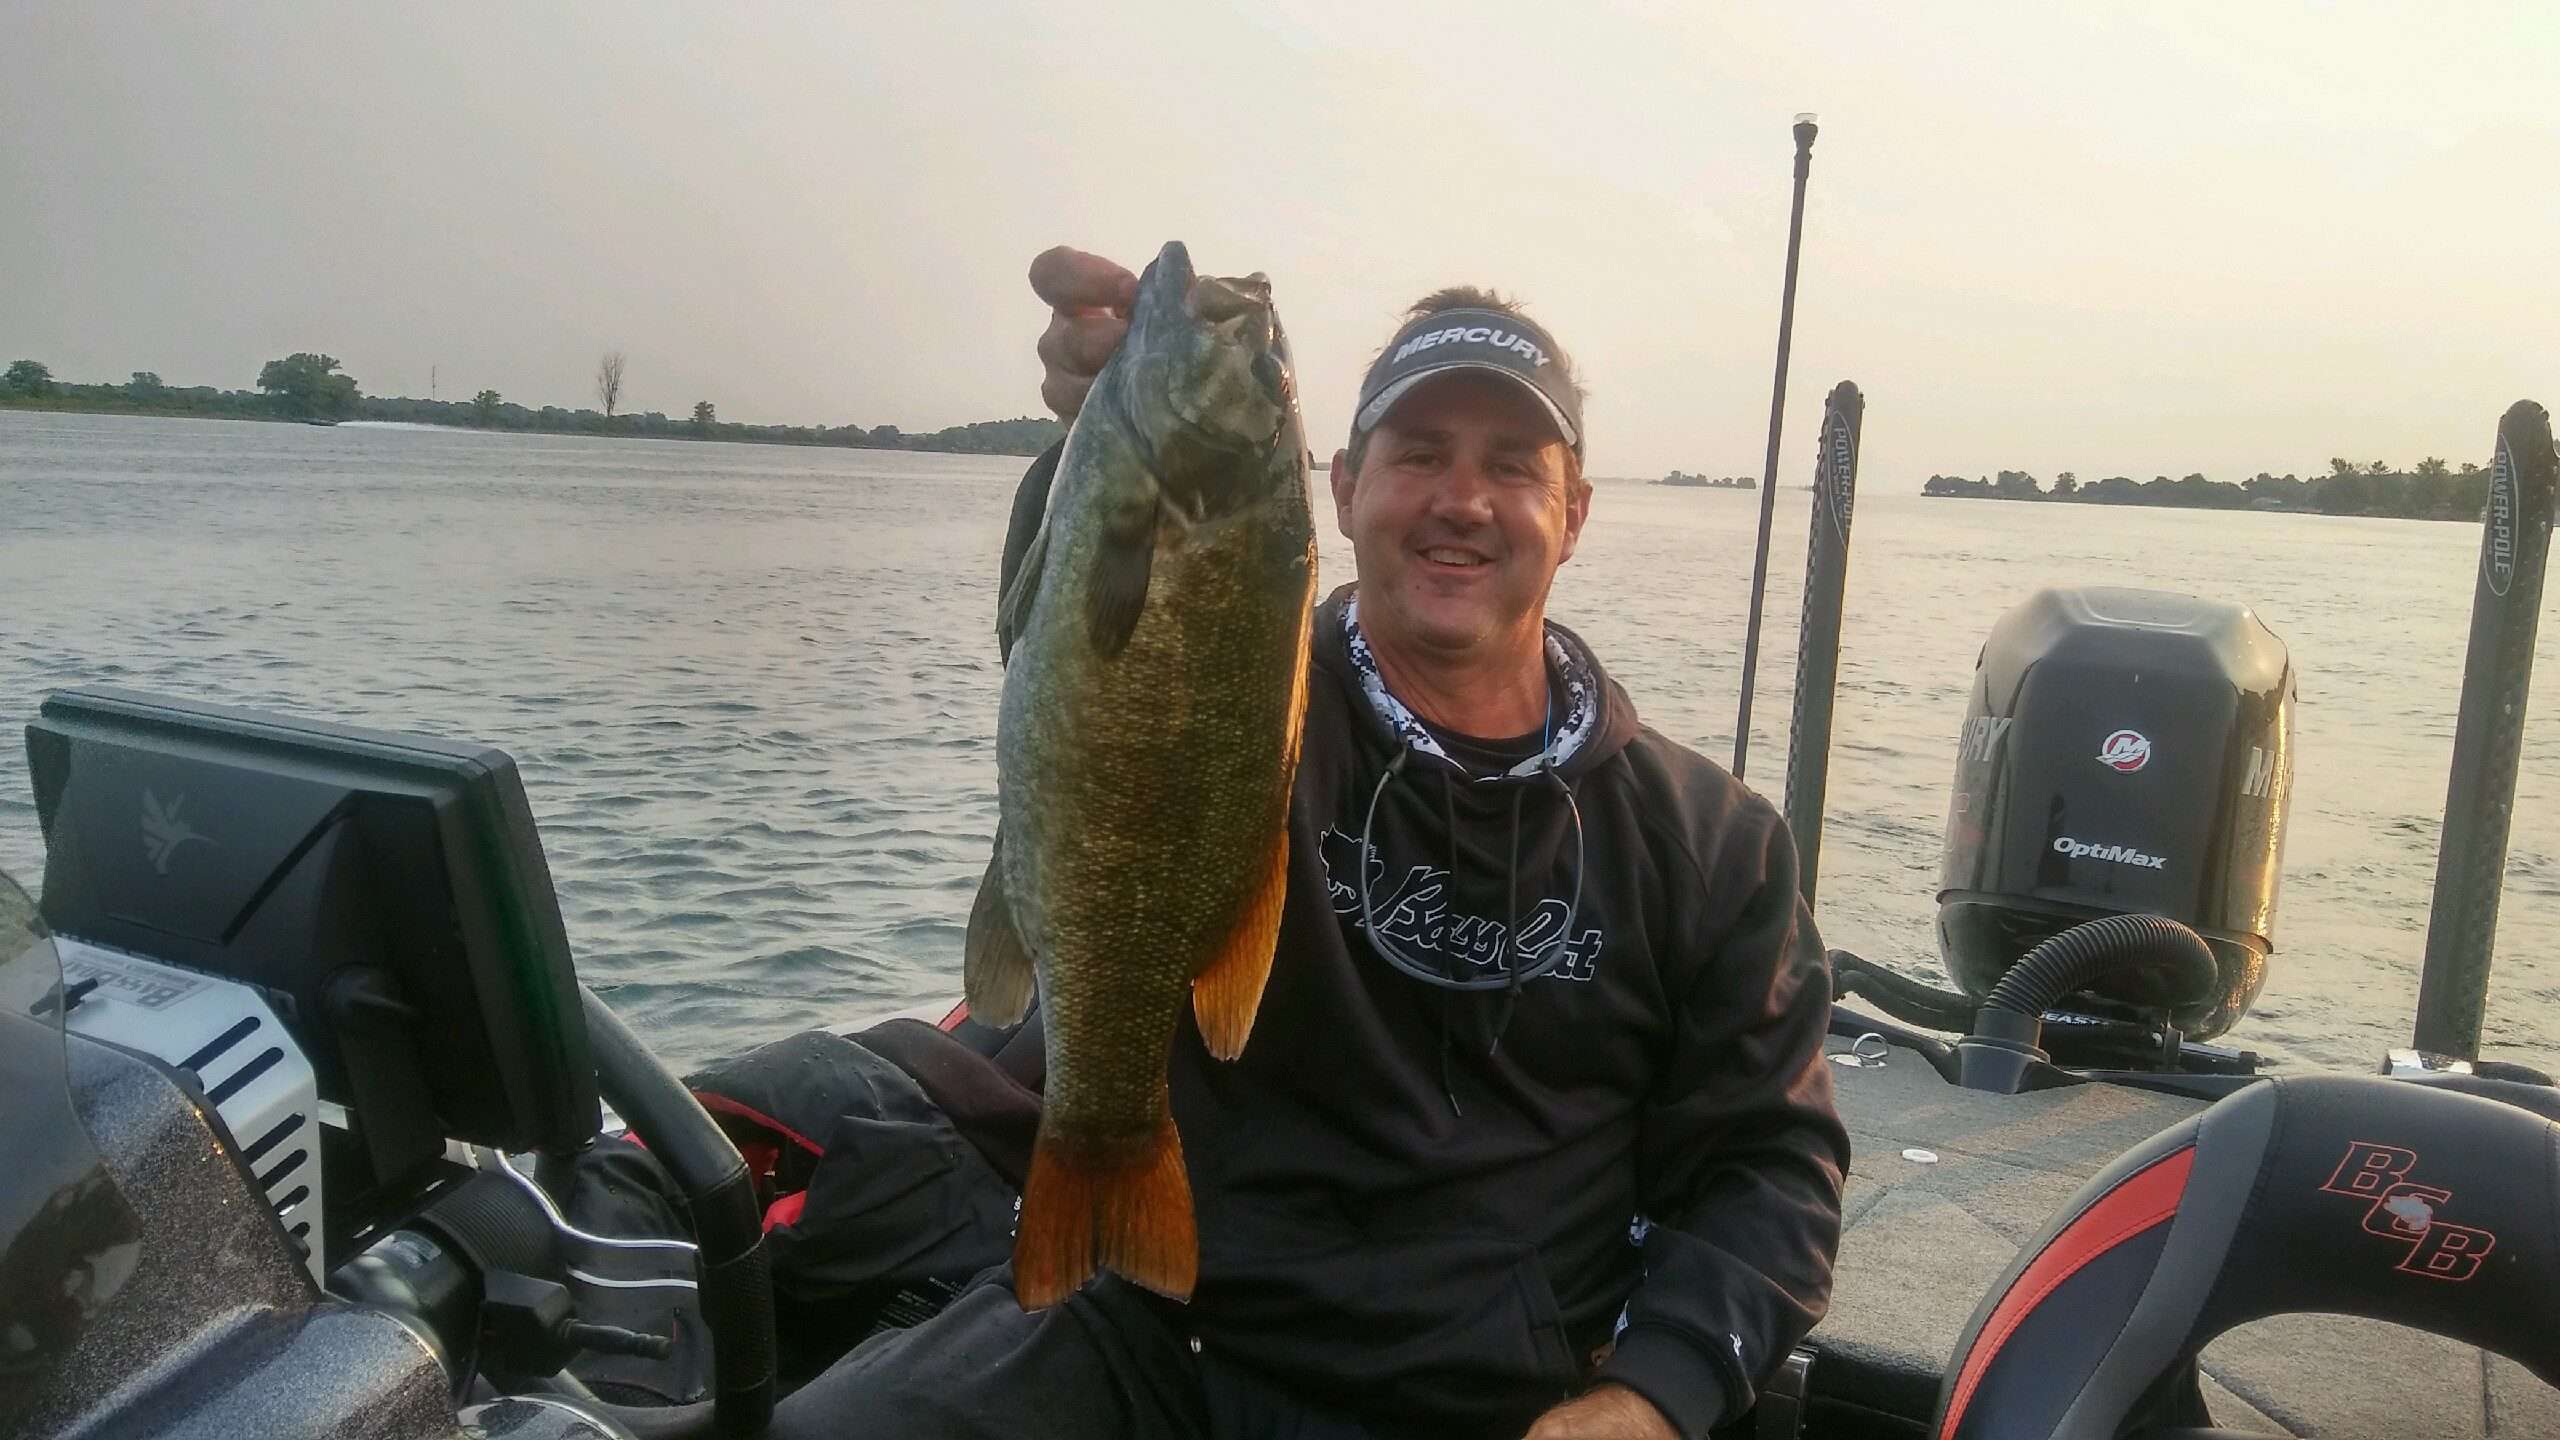 It's a nice start for Robbie Latuso a nice healthy 4-pounder for him. It was battle.but he got it.good .